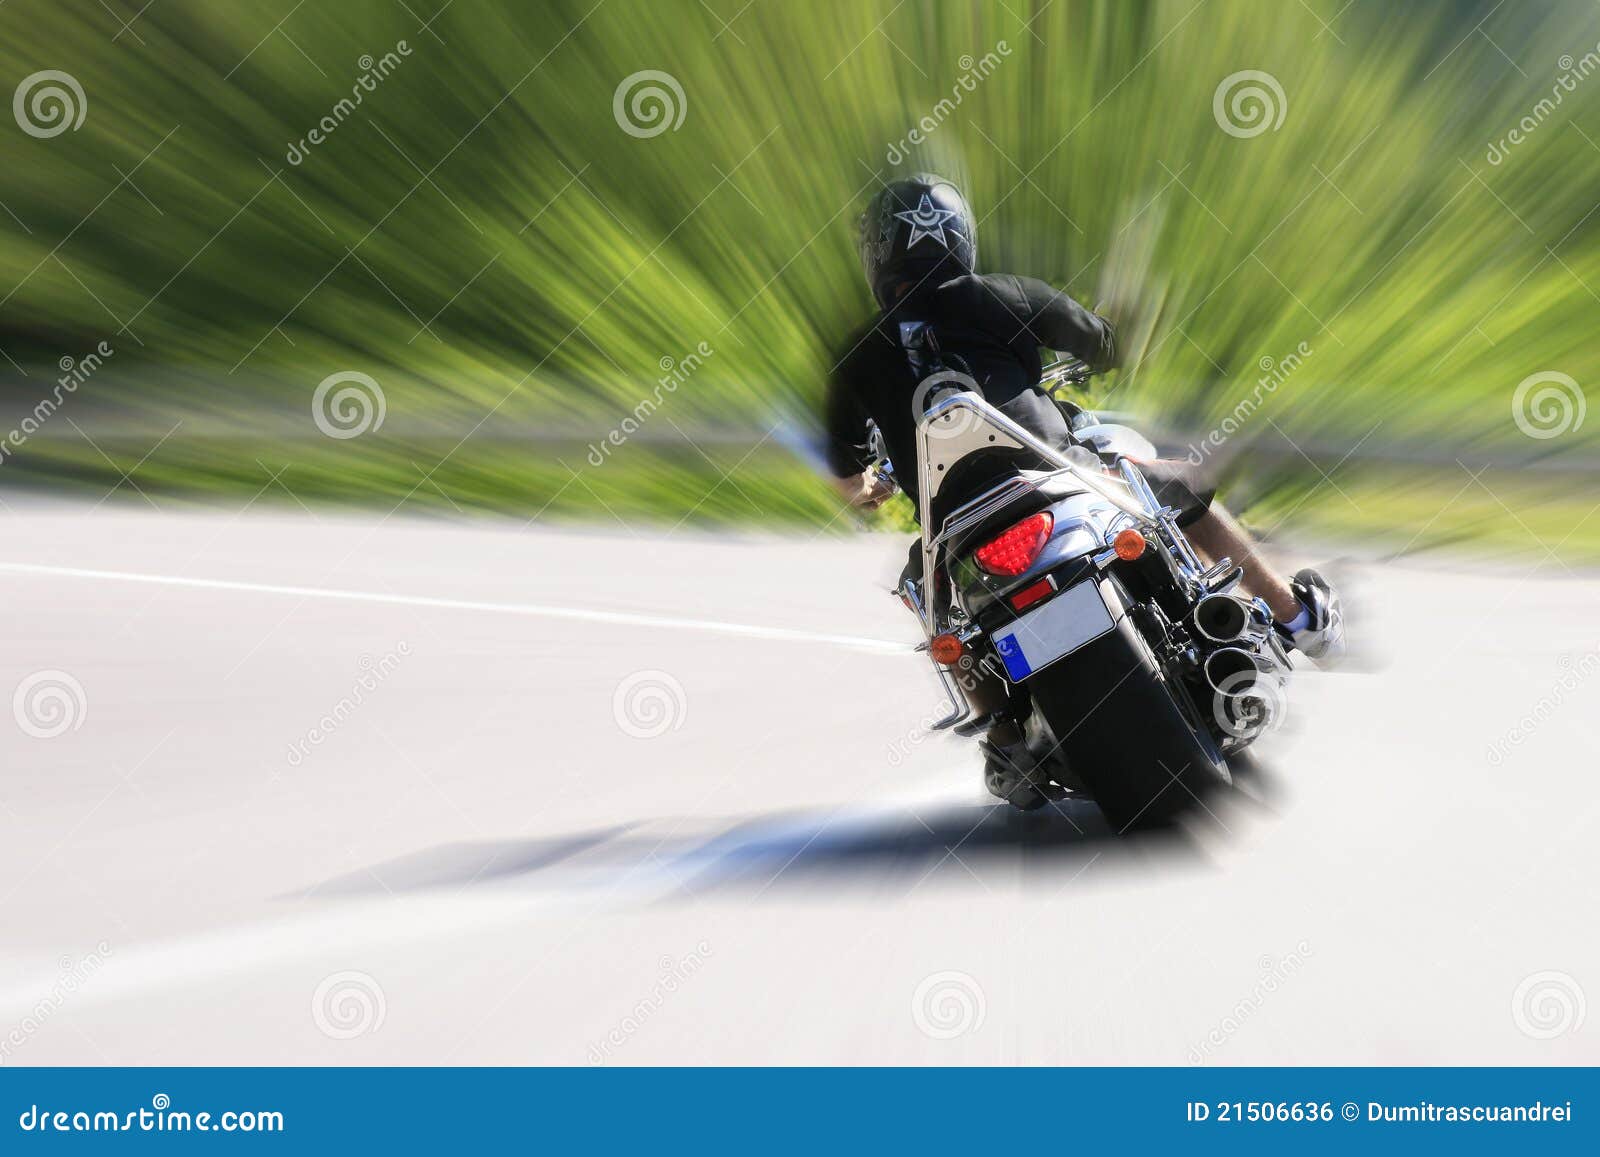 motorcyclist on road